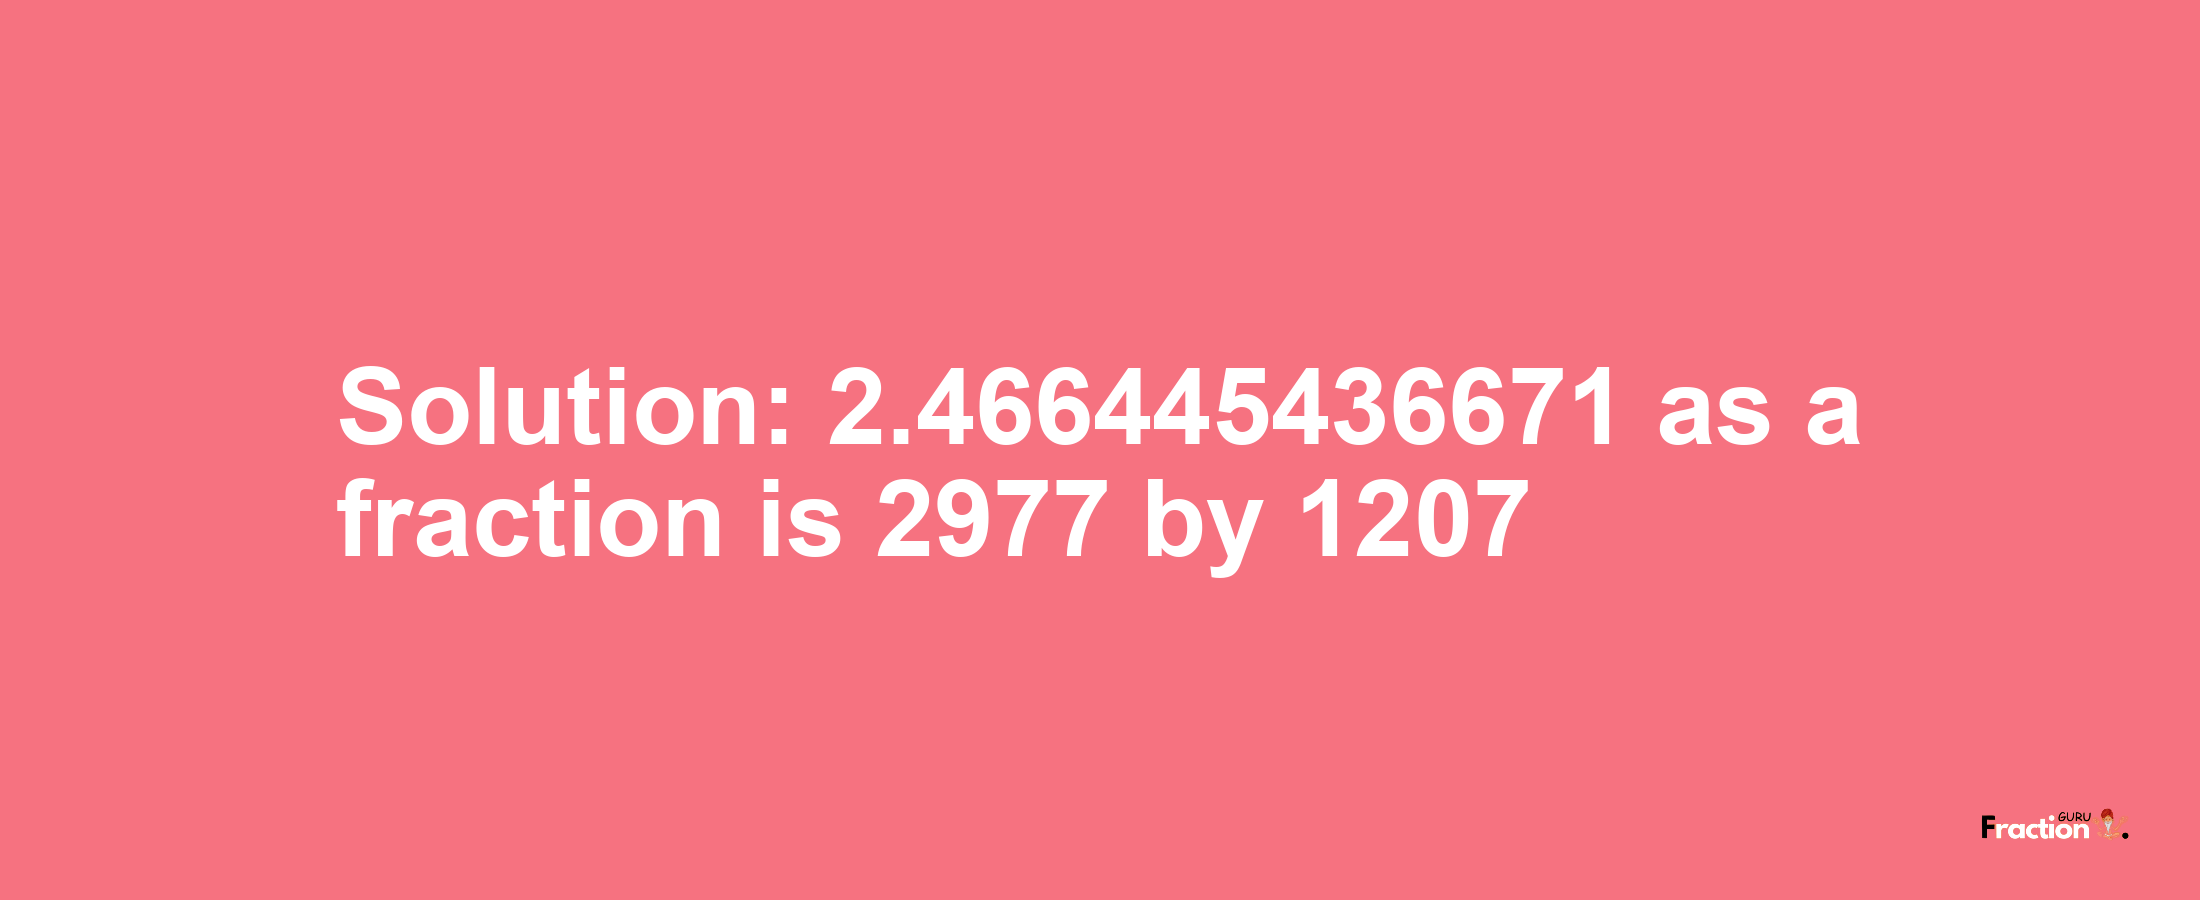 Solution:2.466445436671 as a fraction is 2977/1207